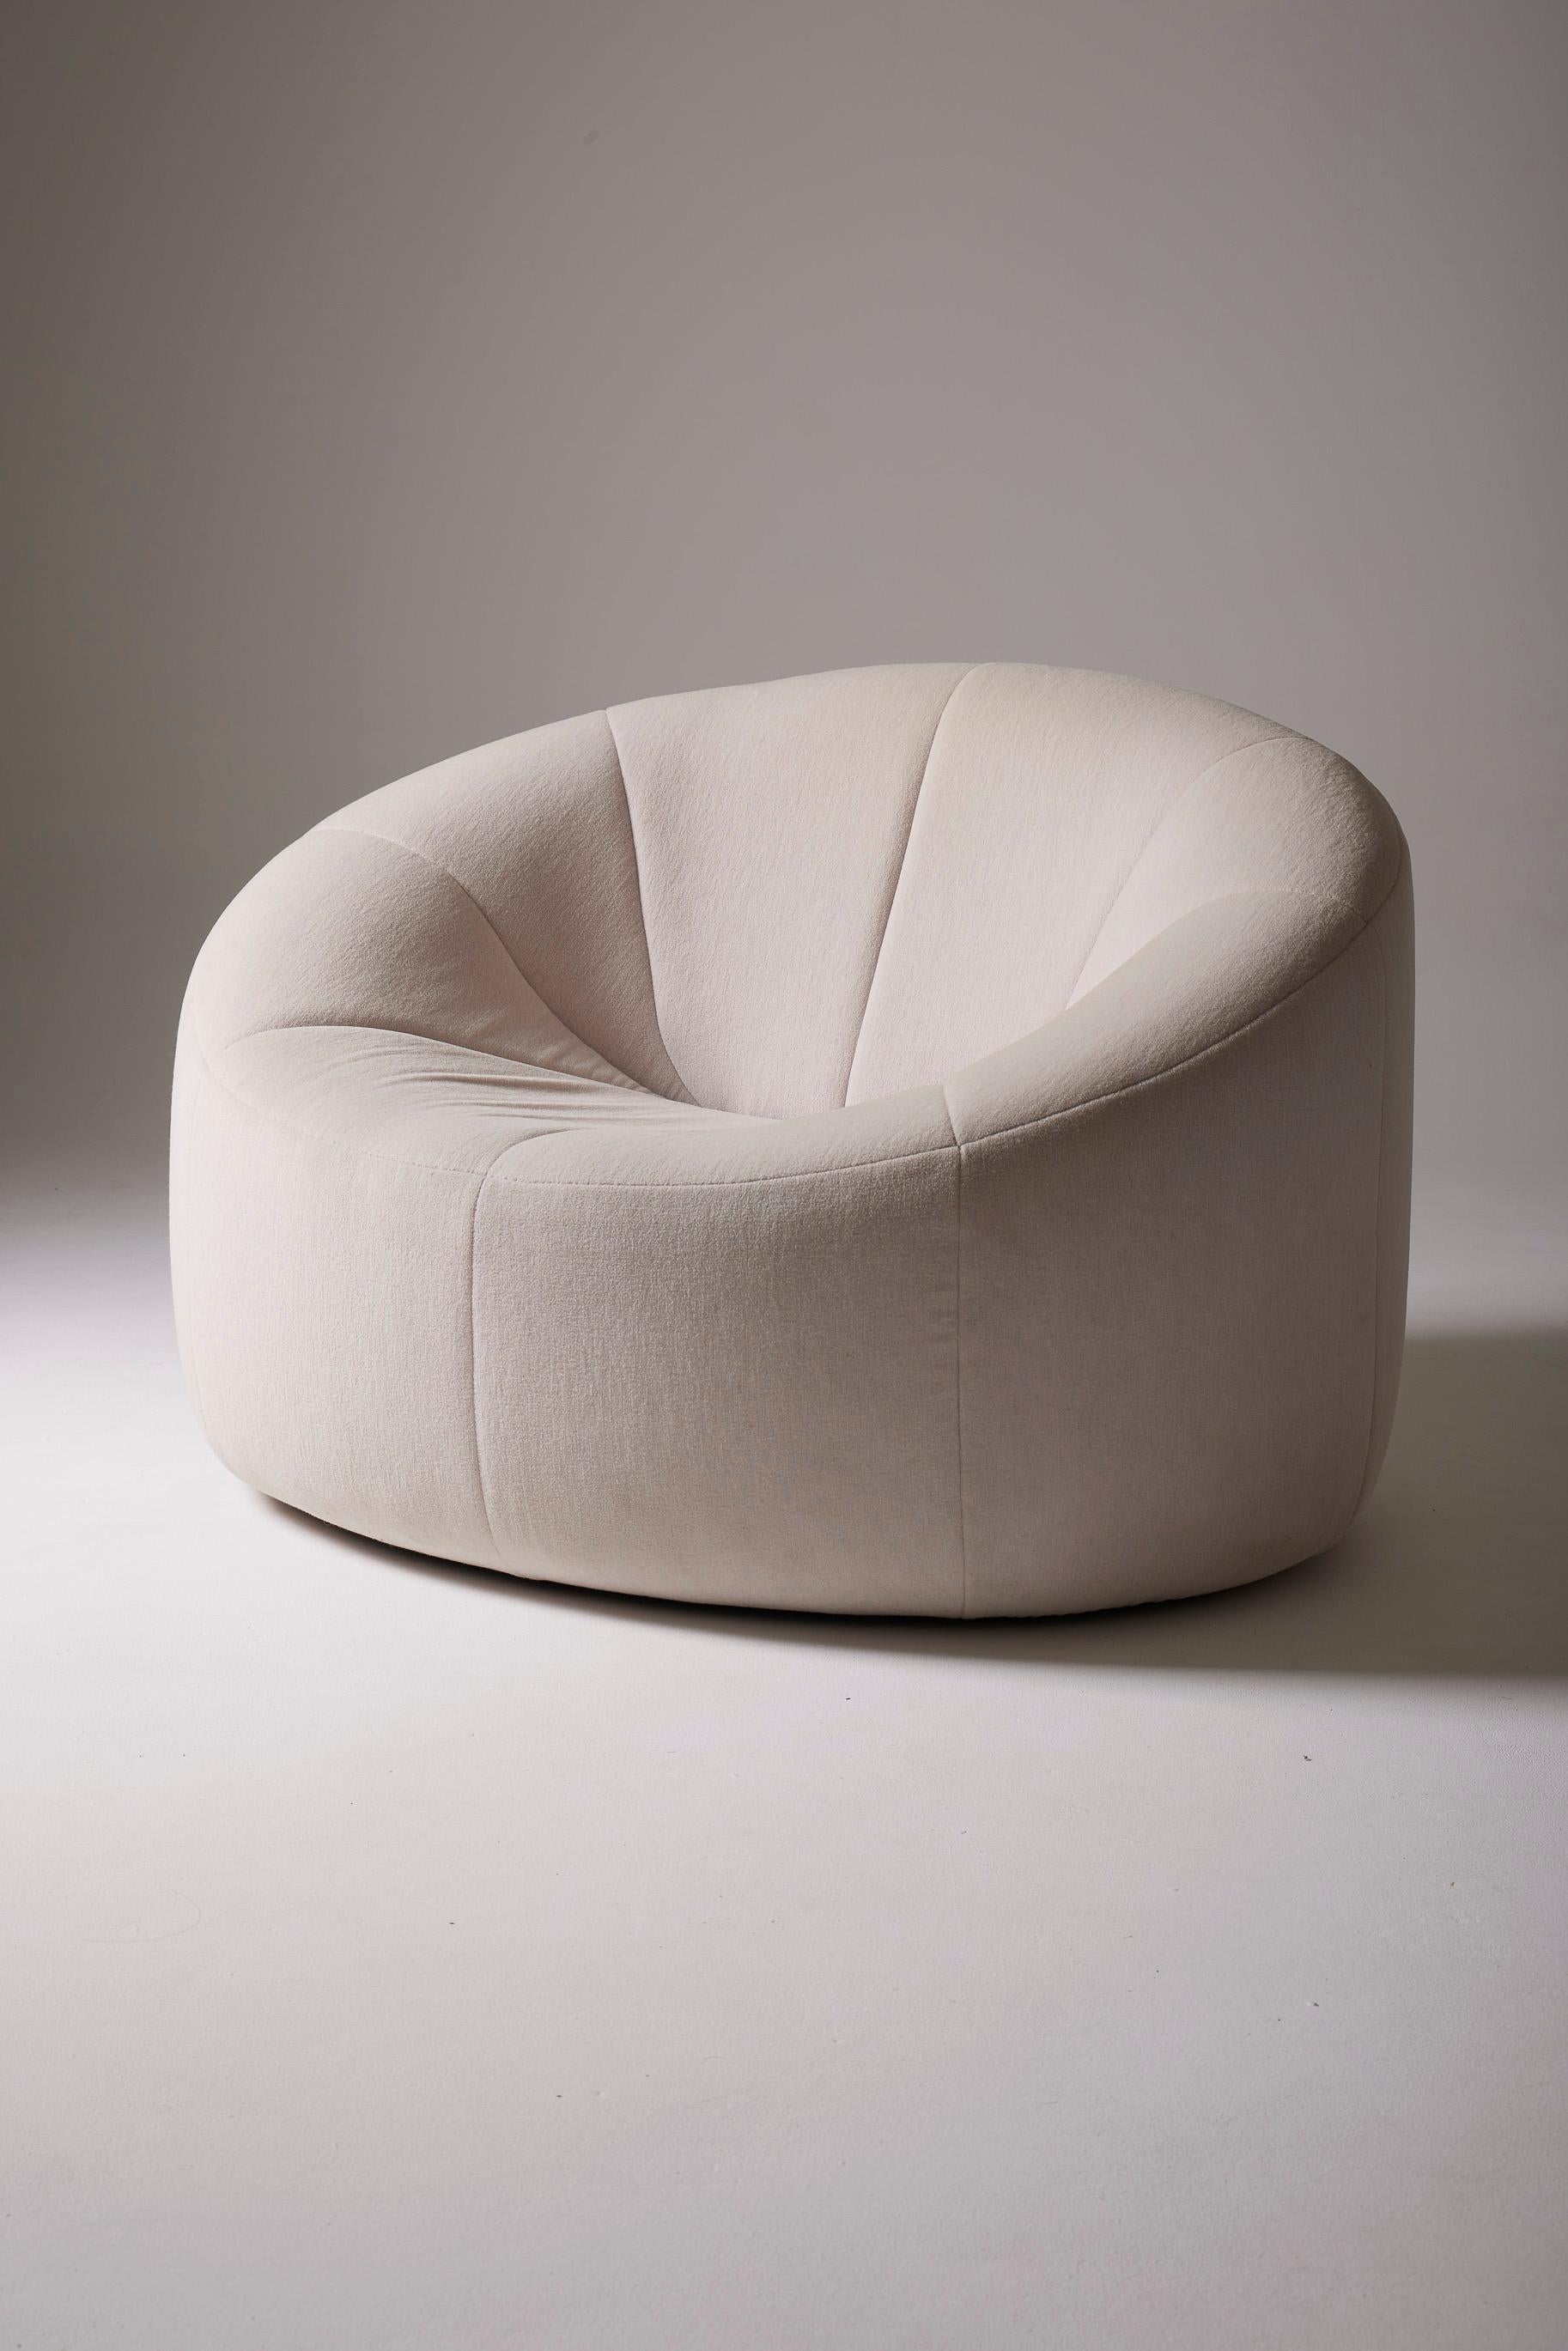 Iconic Pumpkin Armchair designed by Pierre Paulin and produced by Ligne Roset in 1970. Original white fabric, very good condition. This model was initially created for the private apartments of Claude and Georges Pompidou at the Élysée Palace.
LP1405